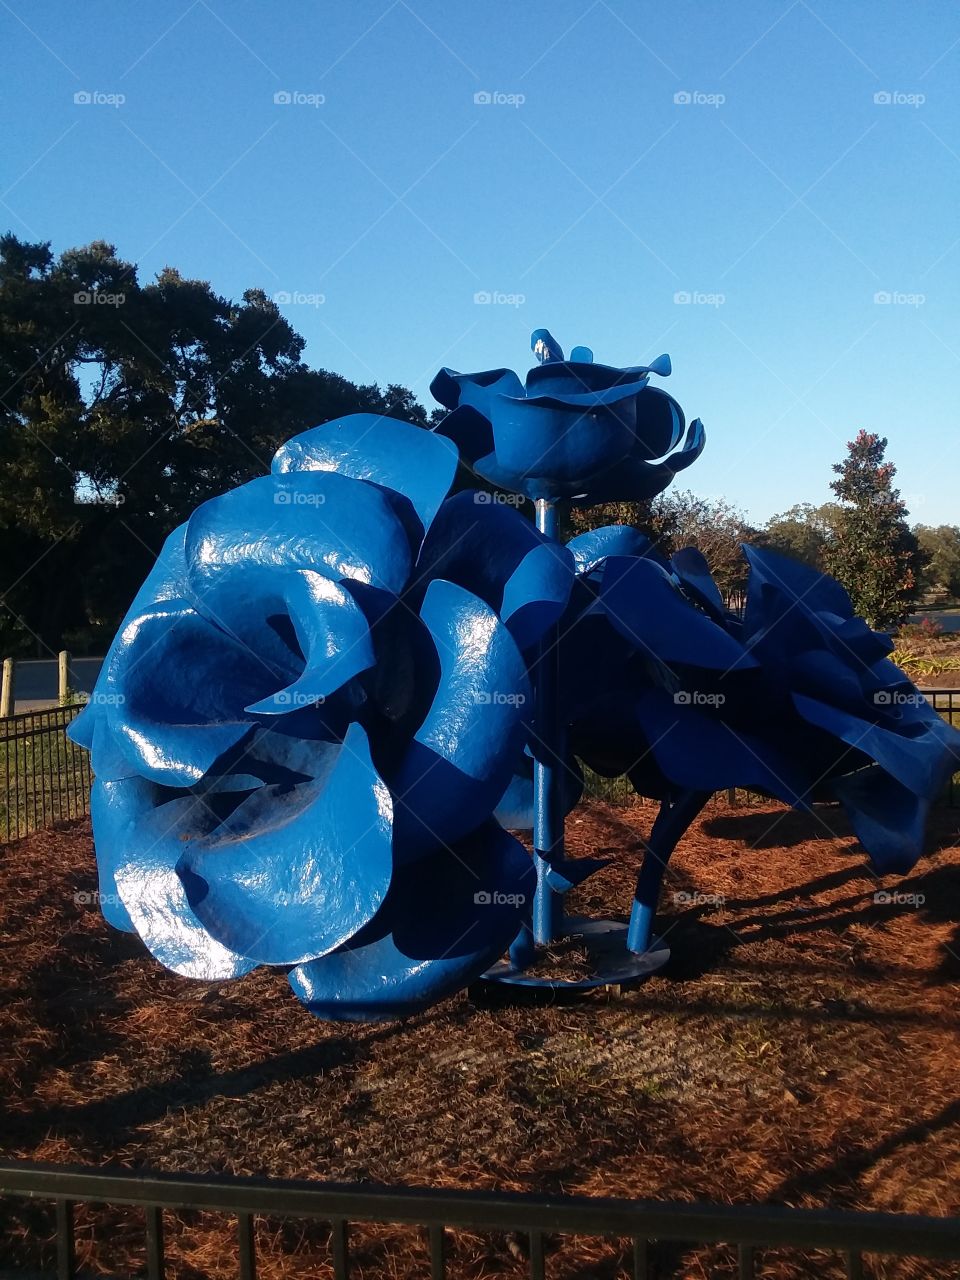 A day in the park, blue roses sculpture in the evening light.